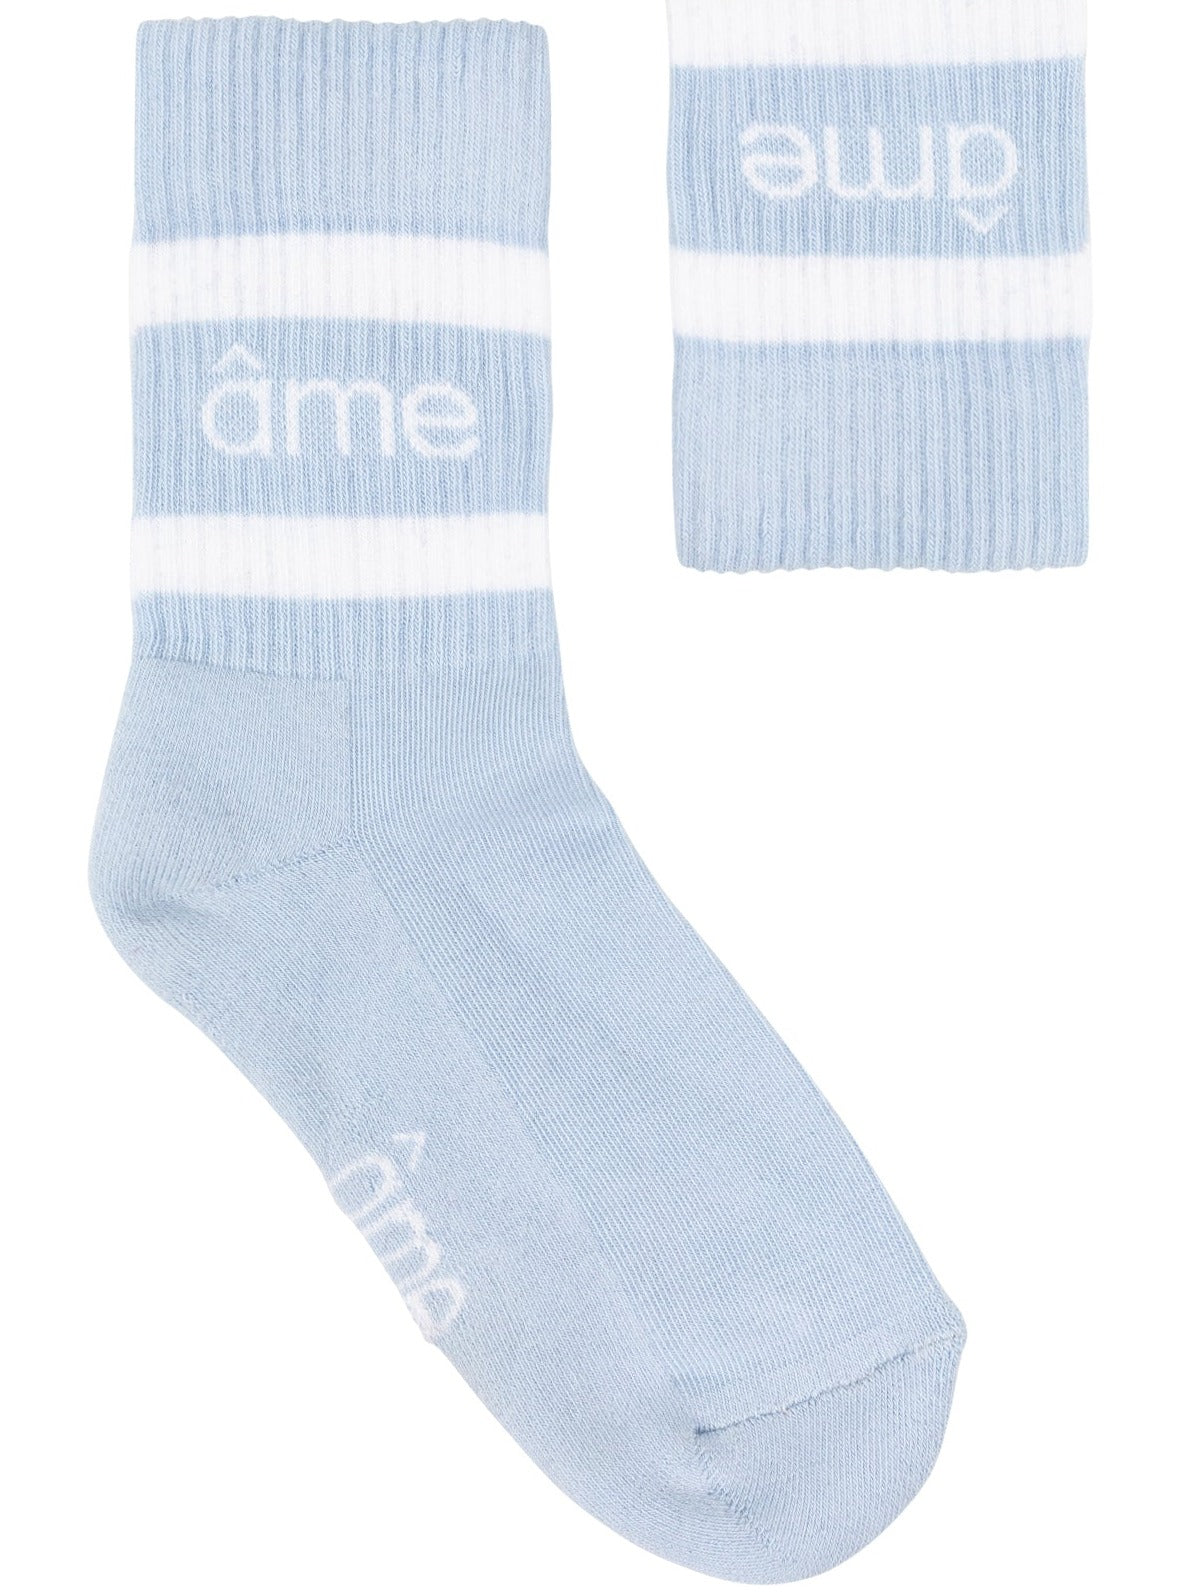 DIEGO SOCKS WITH CONTRASTING LINES | LIGHT BLUE FROM ÂME ANTWERP